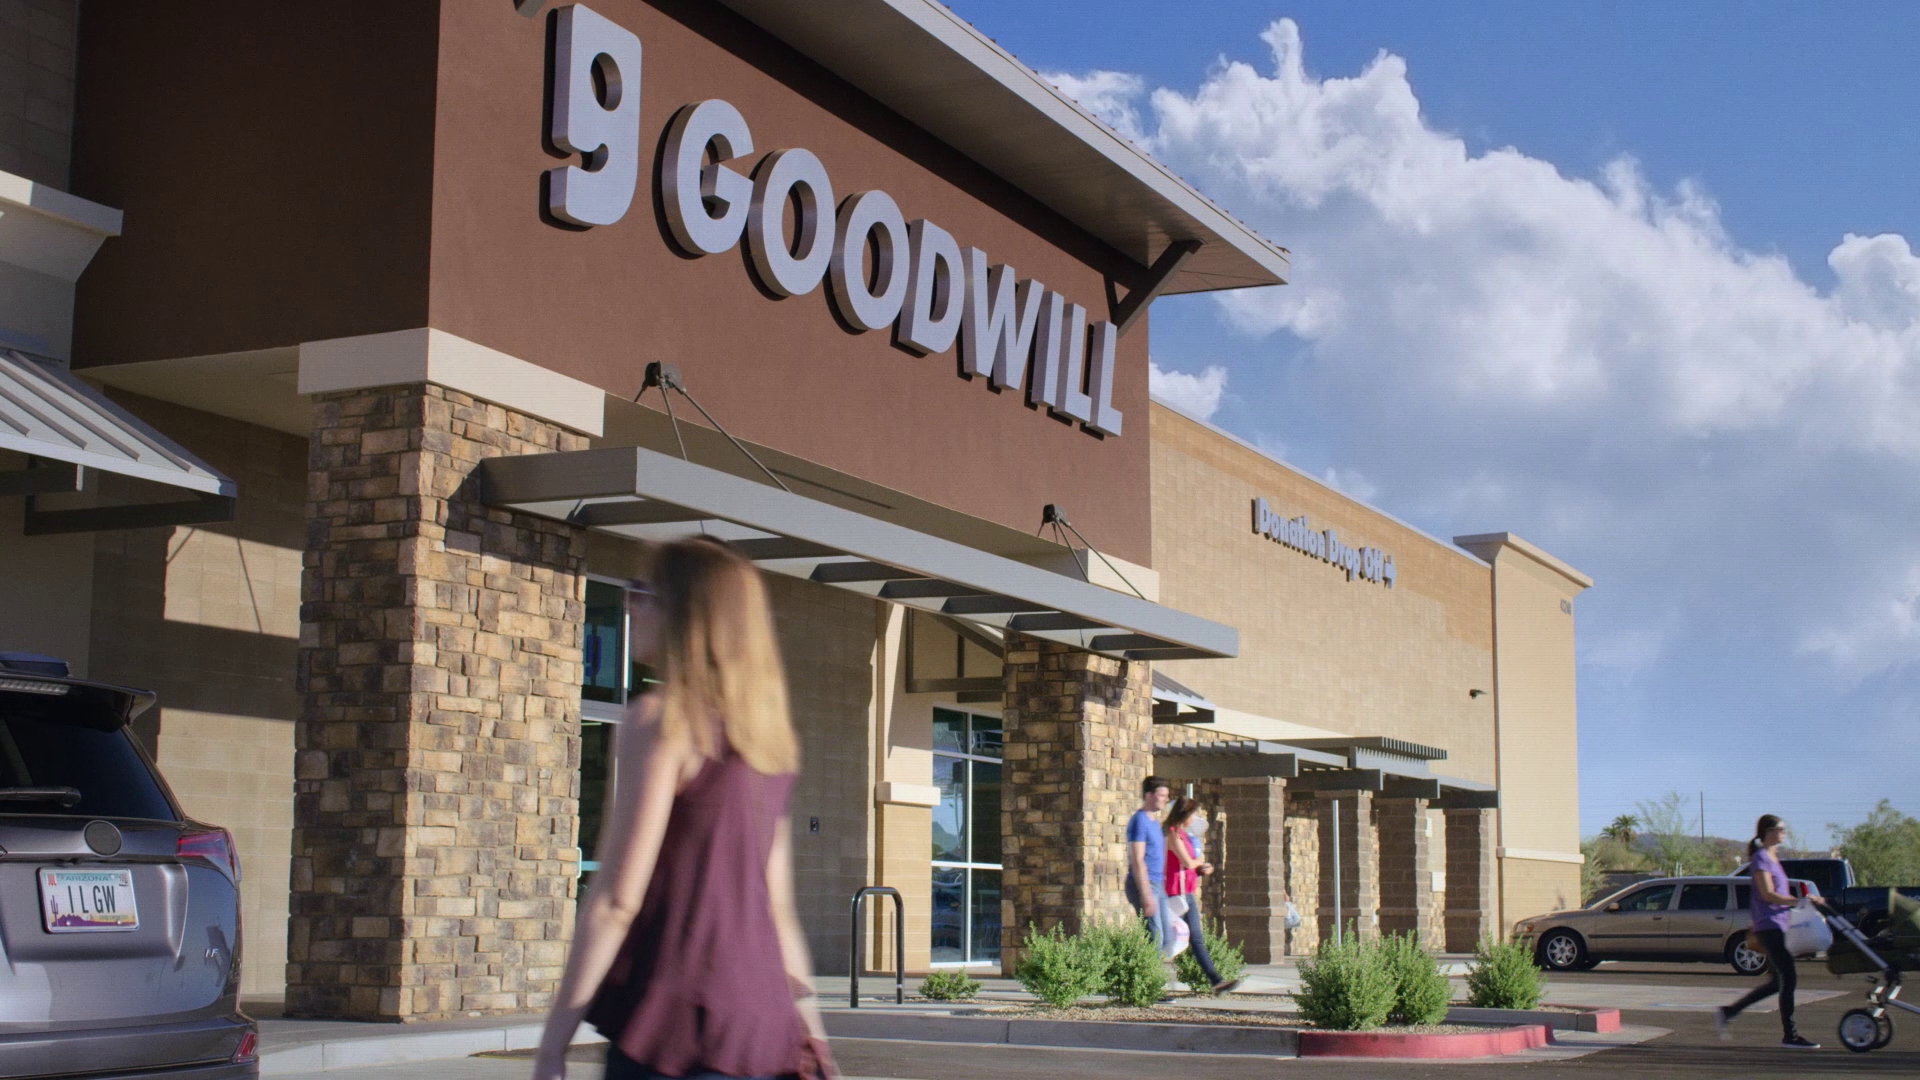 Sedona Goodwill Retail Store and Donations Center